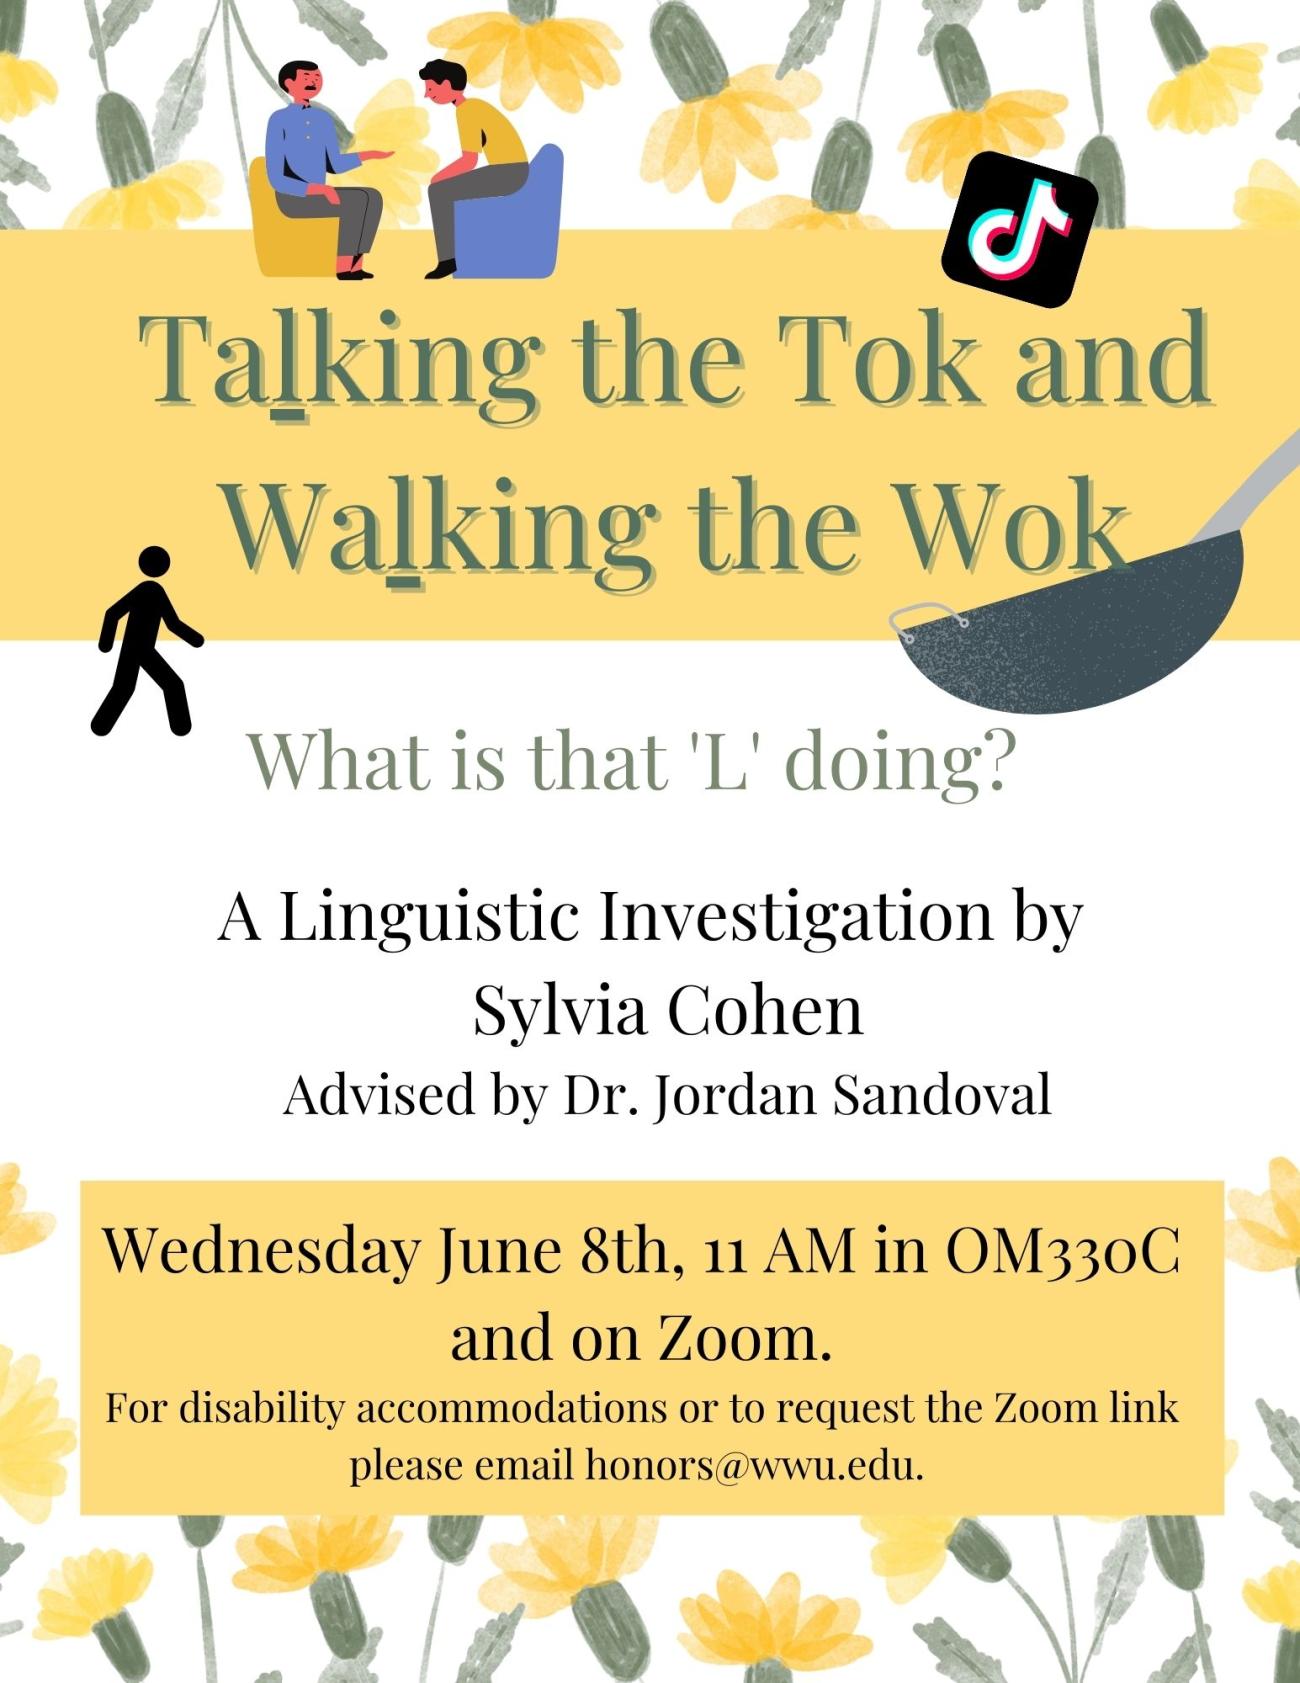 A white poster with a border of yellow flowers at the top and bottom of the page and clipart of the Tik Tok logo, two people talking, a wok, and a person walking. Text reads: "Talking the Tok and Walking the Wok. What is that 'L' doing? A Linguistic Investigation by Sylvia Cohen. Advised by Dr. Jordan Sandoval. Wednesday June 8th, 11AM OM330C and on Zoom. For disability accommodations or to request the Zoom link please email honors@wwu.edu." The 'L' in Talking and Walking are underlined.